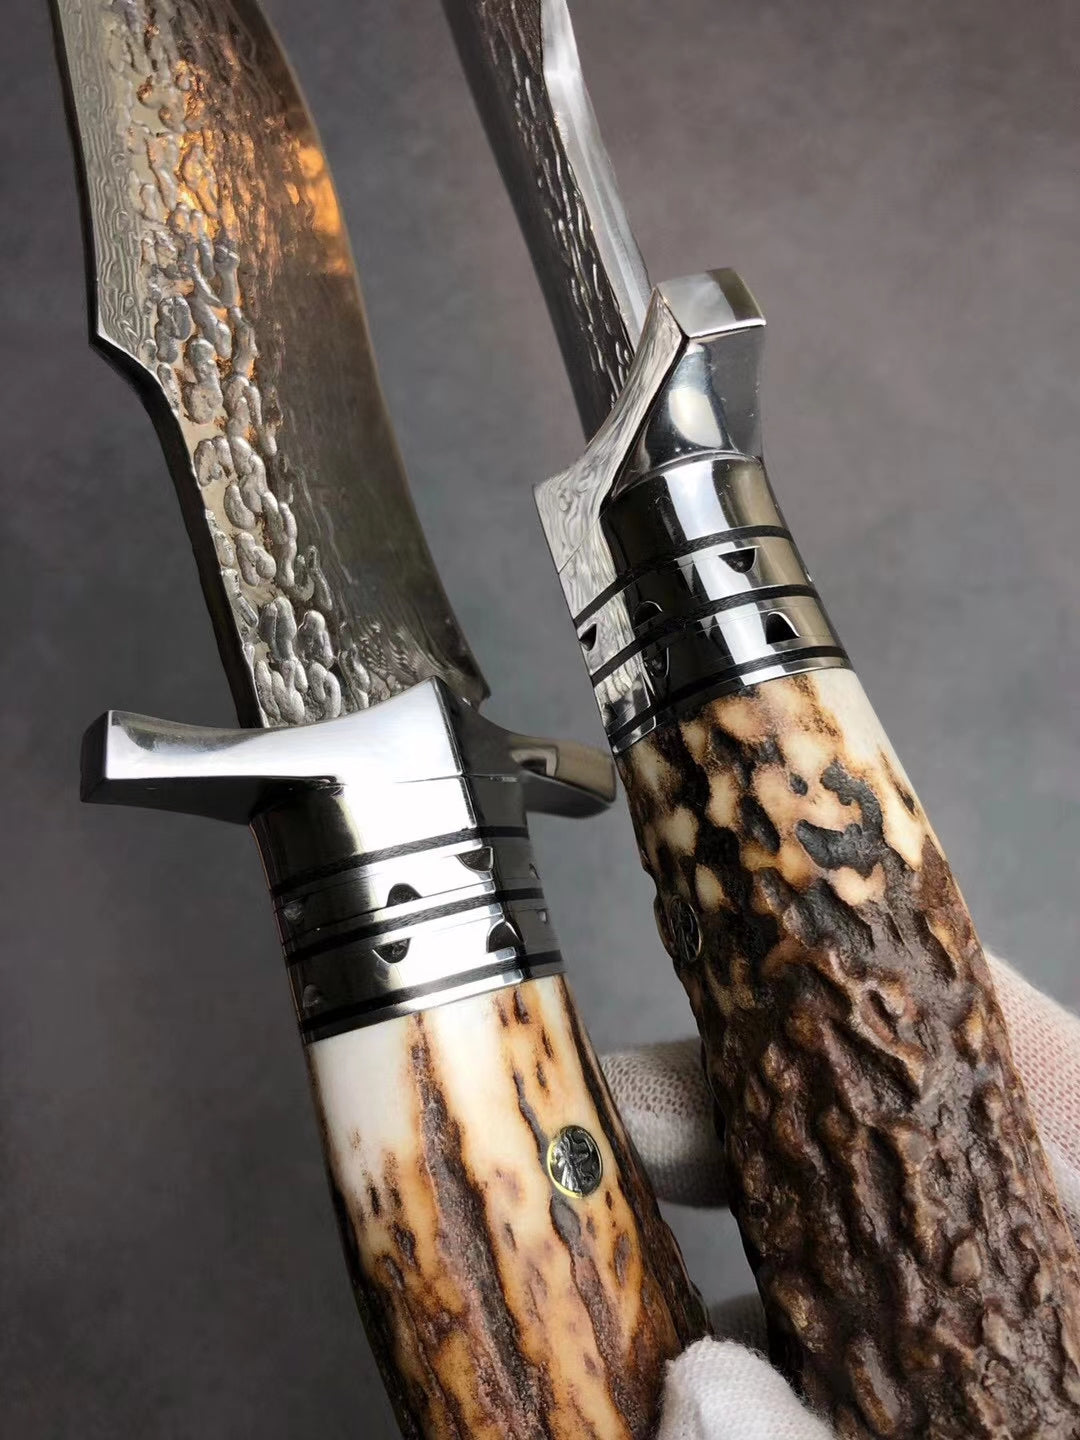 Damascus Survival Outdoor Camping Hunting Knife Fixed Blade Stag Antler Sheath - AK-HT0307